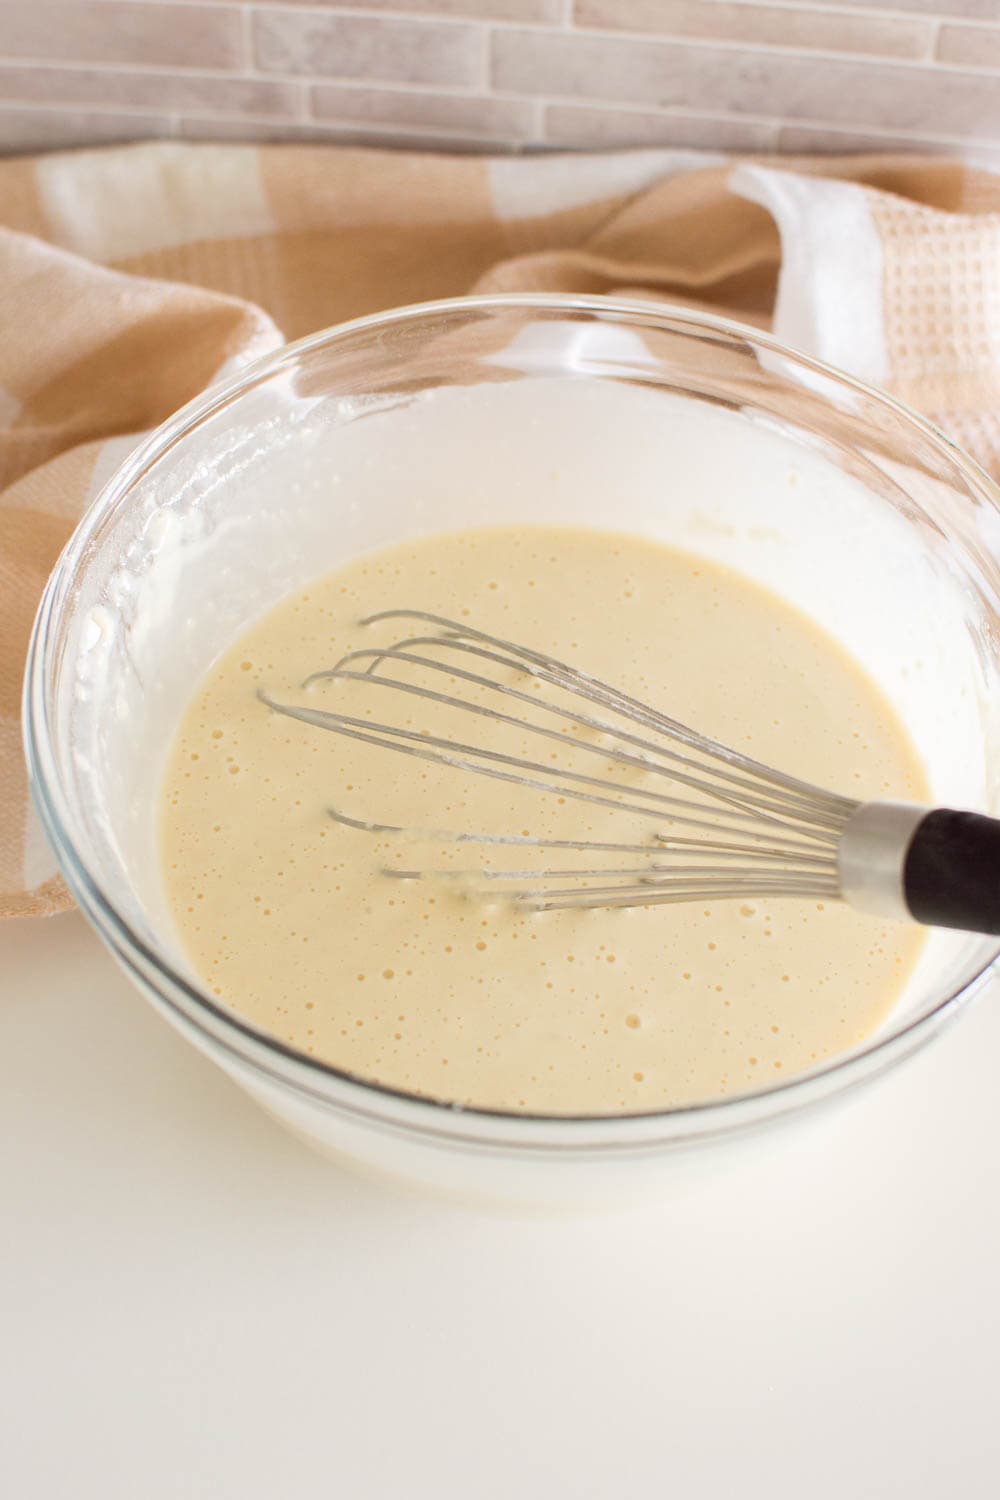 Waffle batter in a glass bowl, being mixed by a whisk